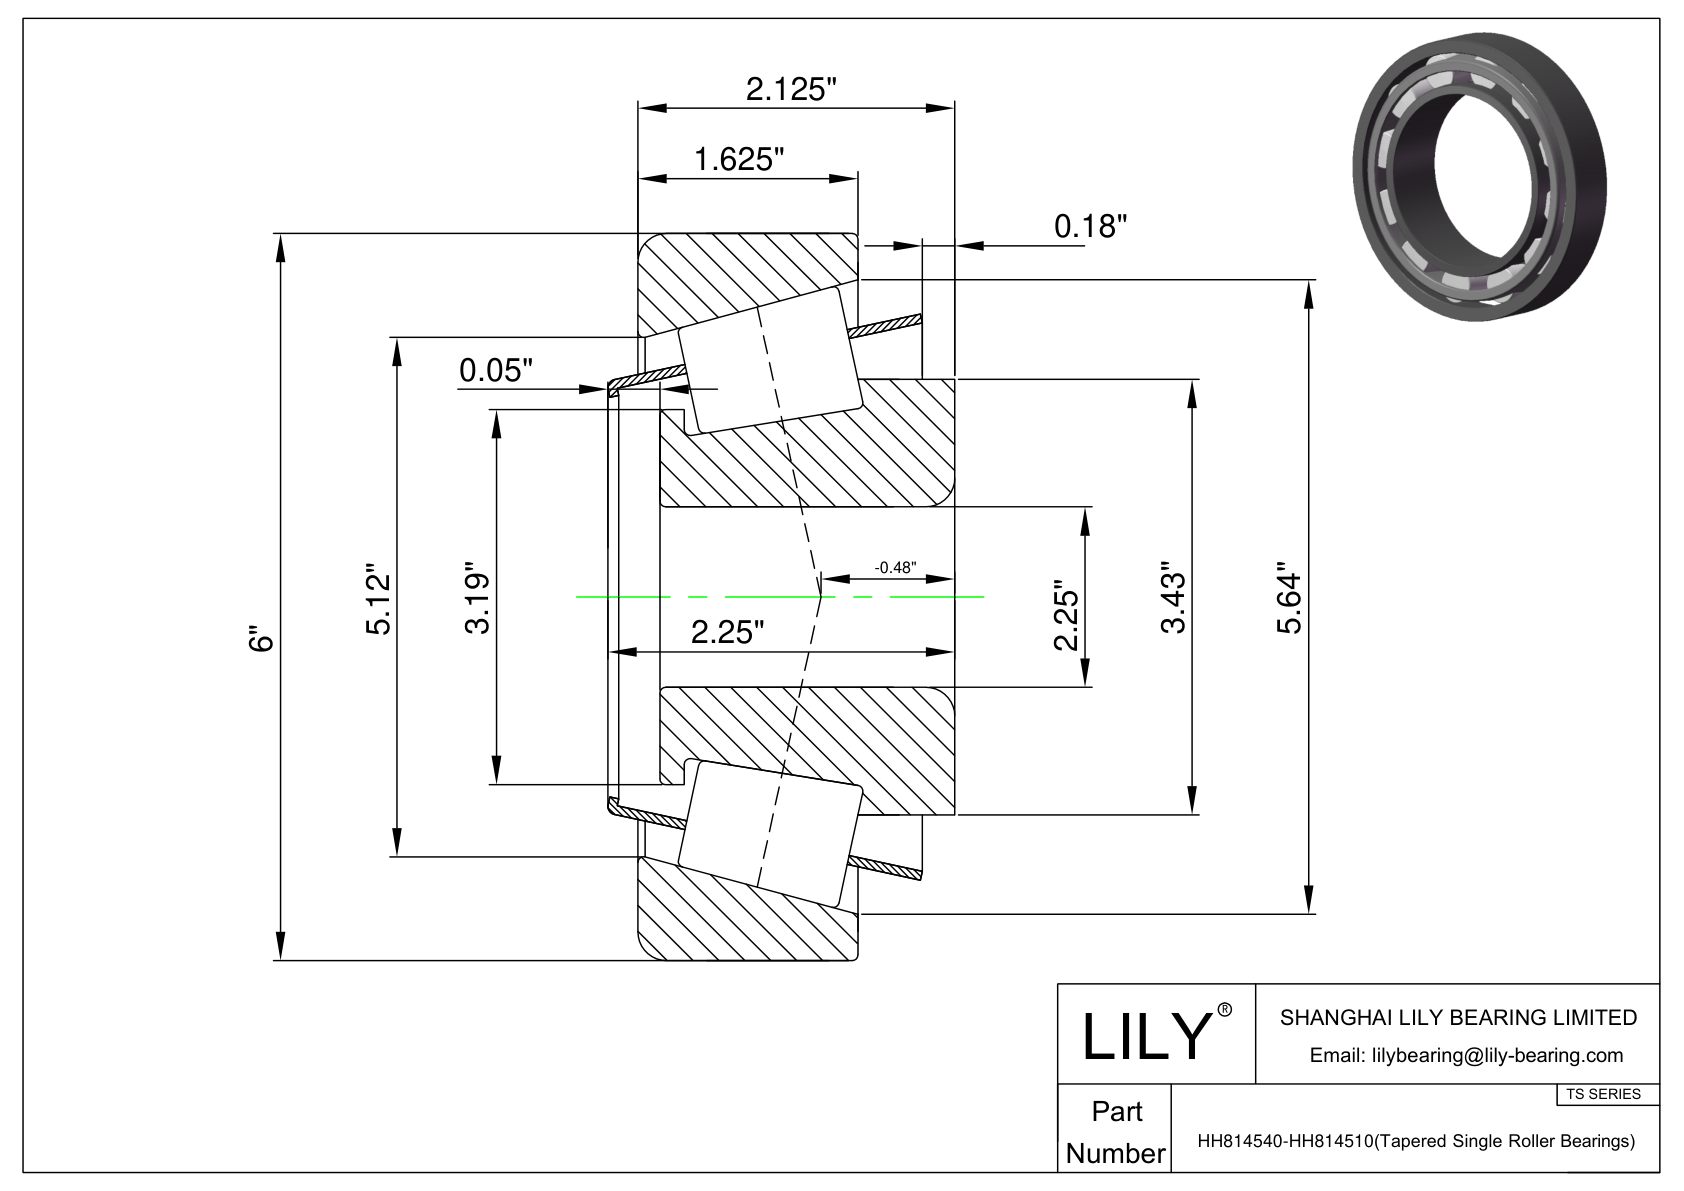 HH814540-HH814510 TS (Tapered Single Roller Bearings) (Imperial) cad drawing